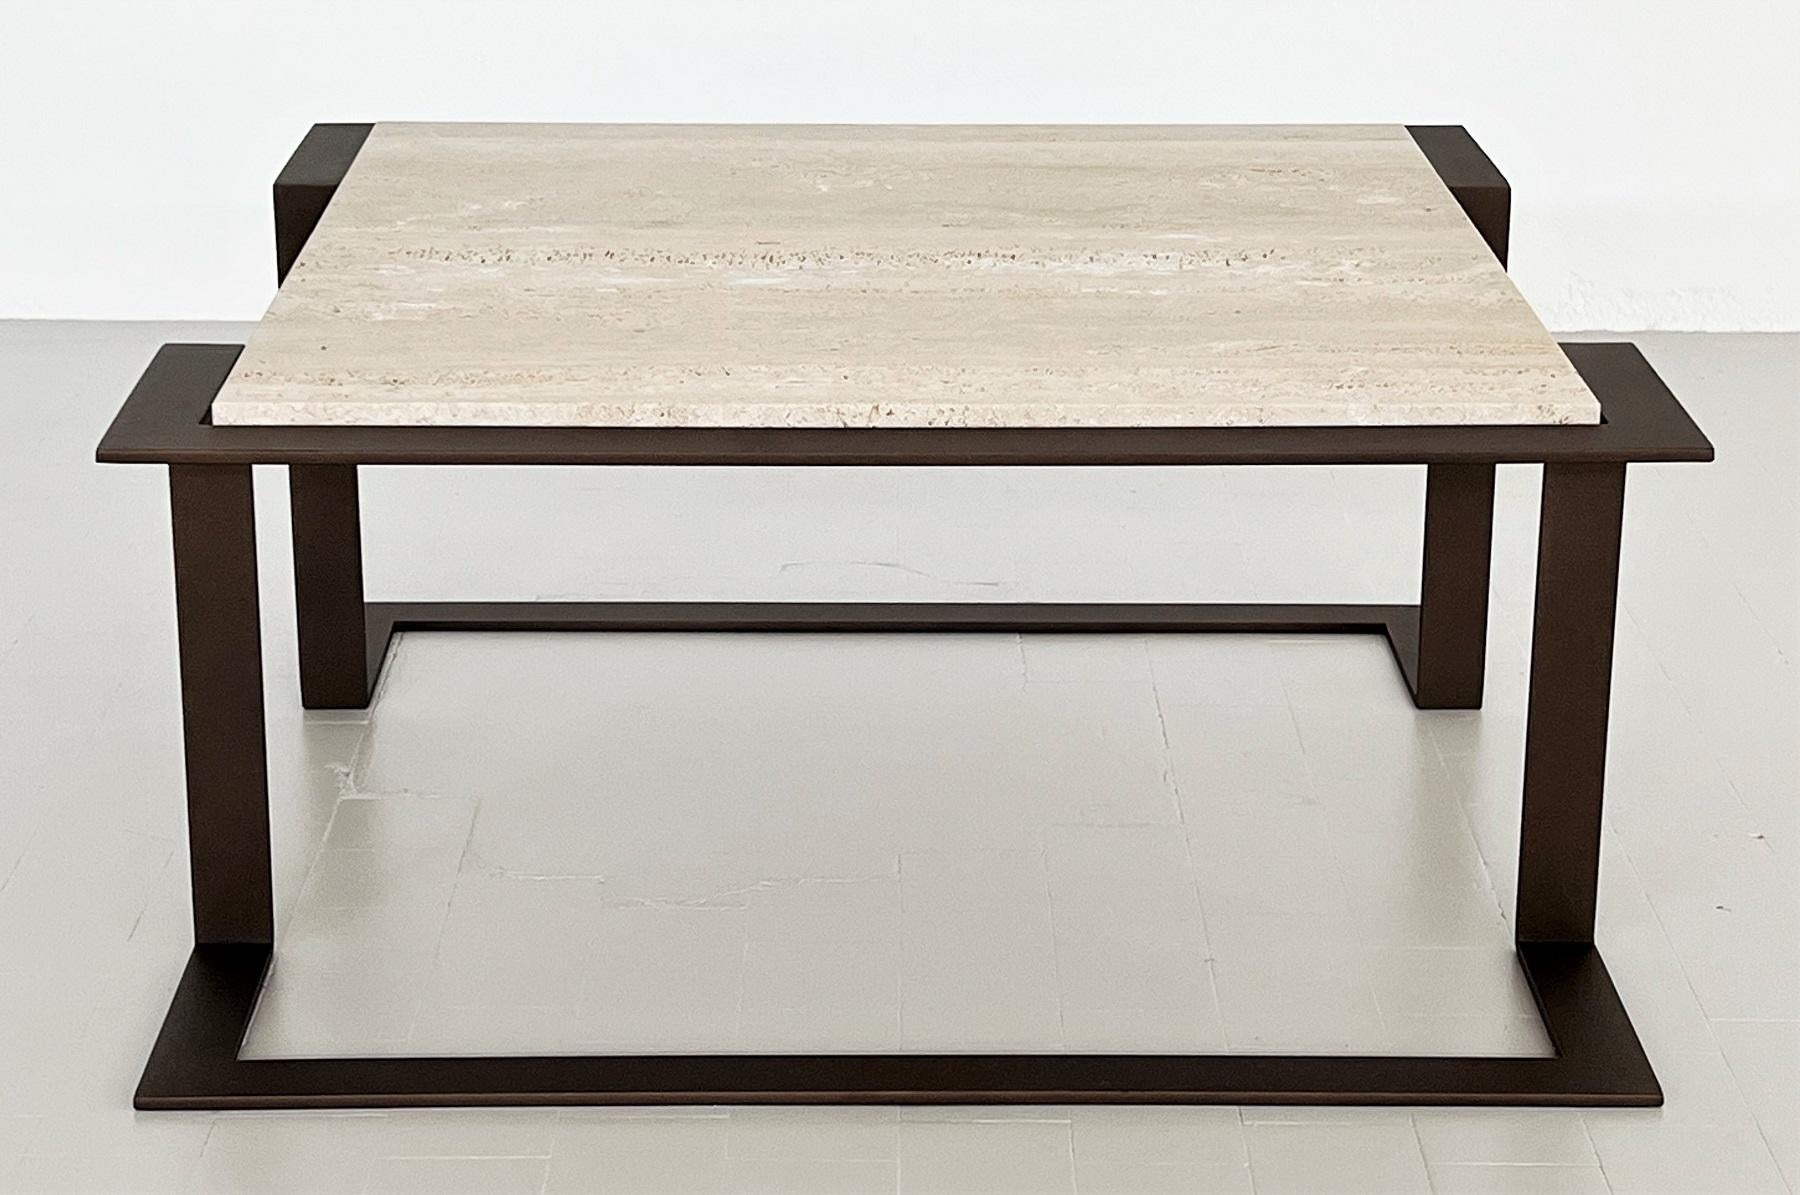 Hand-Crafted Italian Mid-Century Travertine Marble Coffee Table and Metal Base, 1970 For Sale